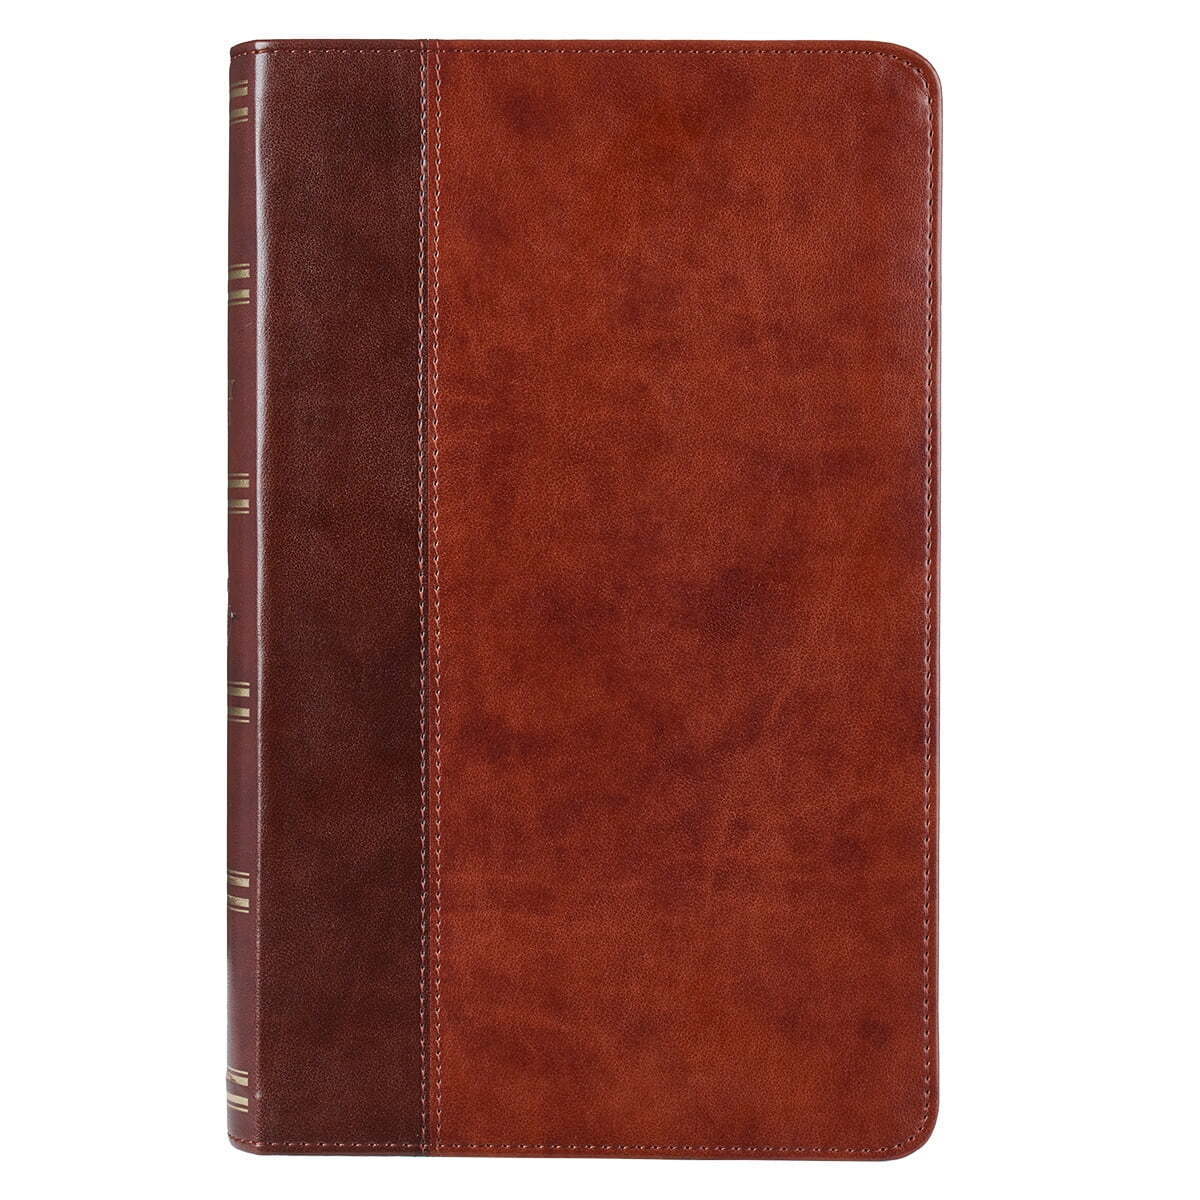 KJV Holy Bible, Giant Print Standard Size Faux Leather Red Letter Edition, New.